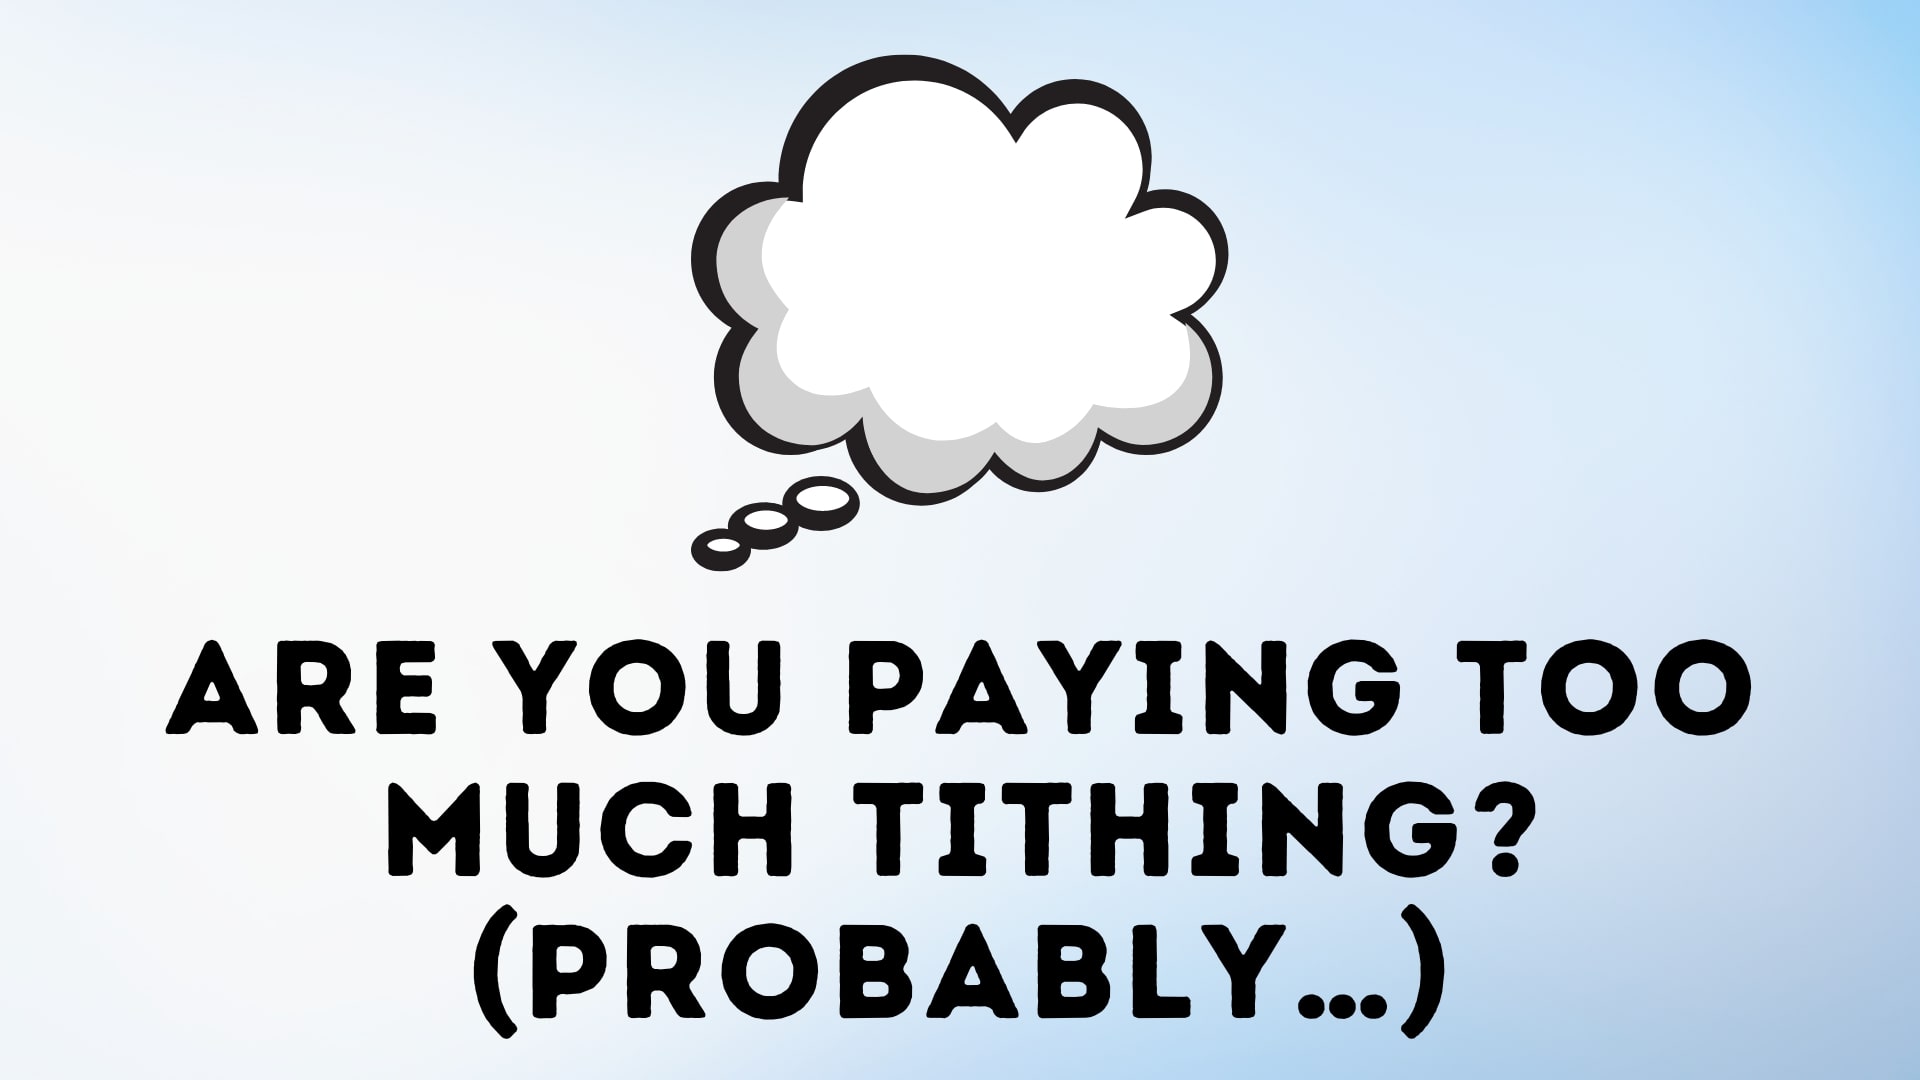 Are you paying too much tithing? (Probably…)